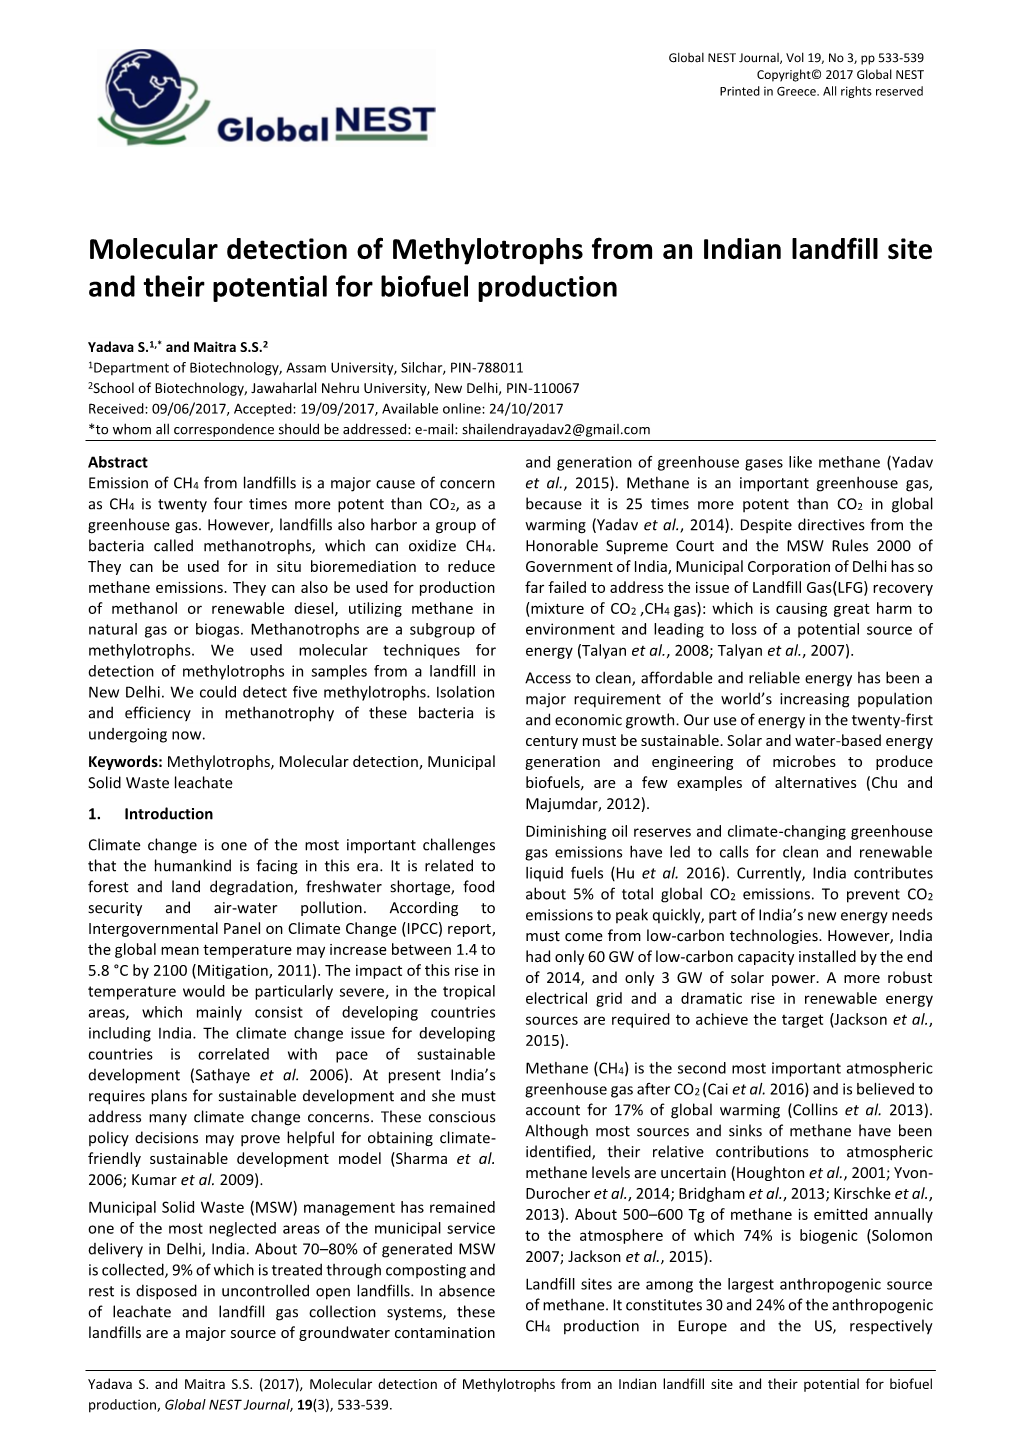 Molecular Detection of Methylotrophs from an Indian Landfill Site and Their Potential for Biofuel Production